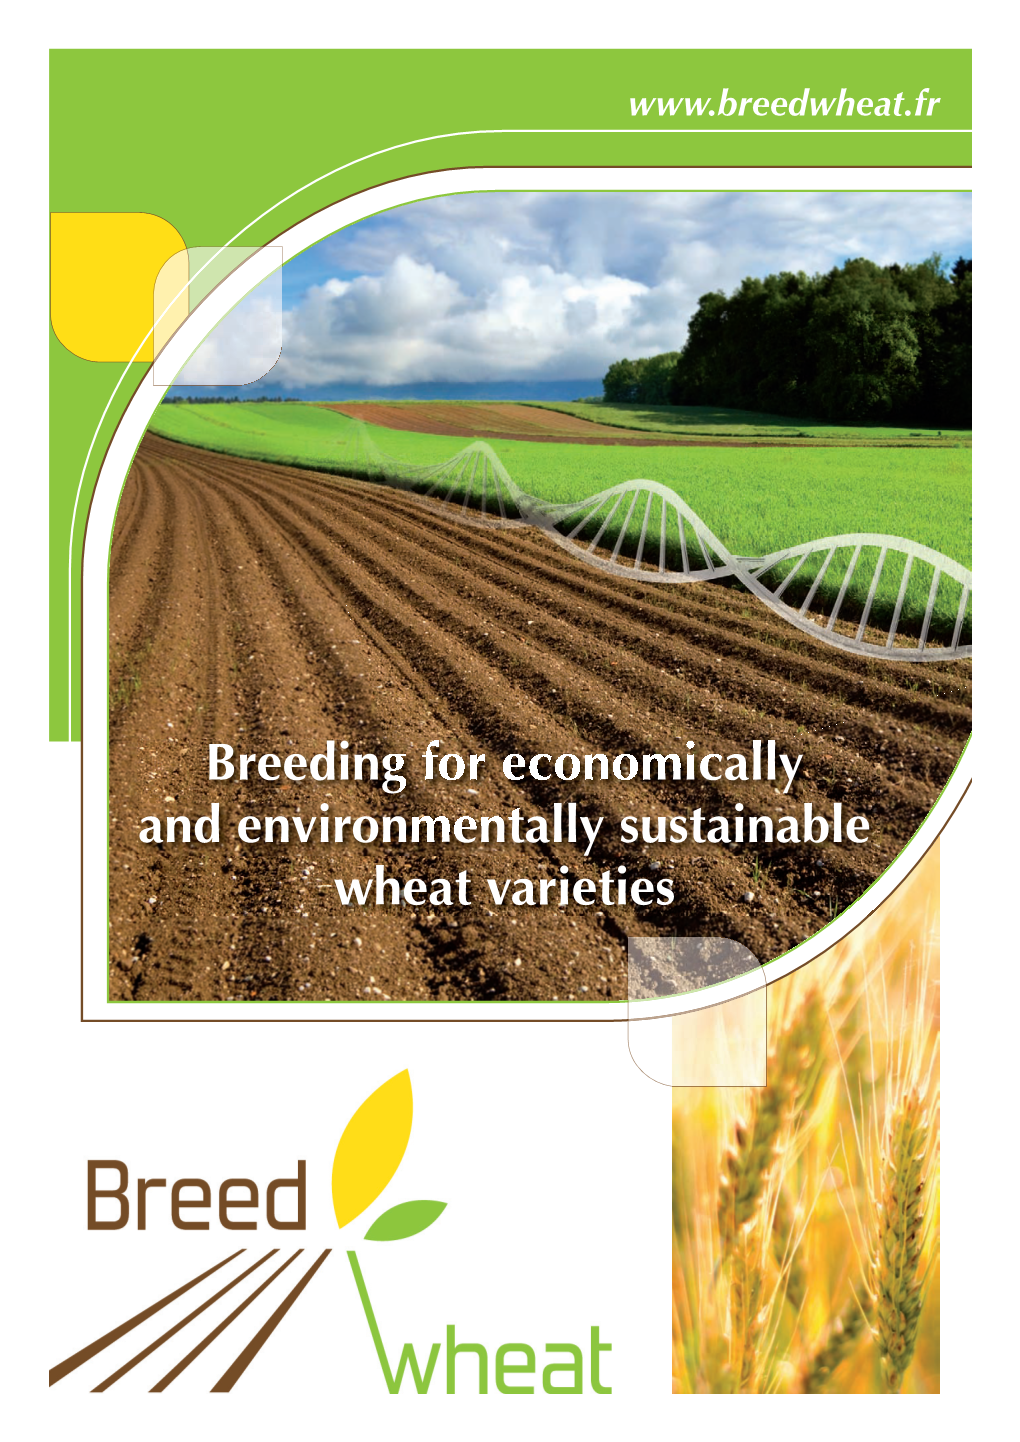 Breeding for Economically and Environmentally Sustainable Wheat